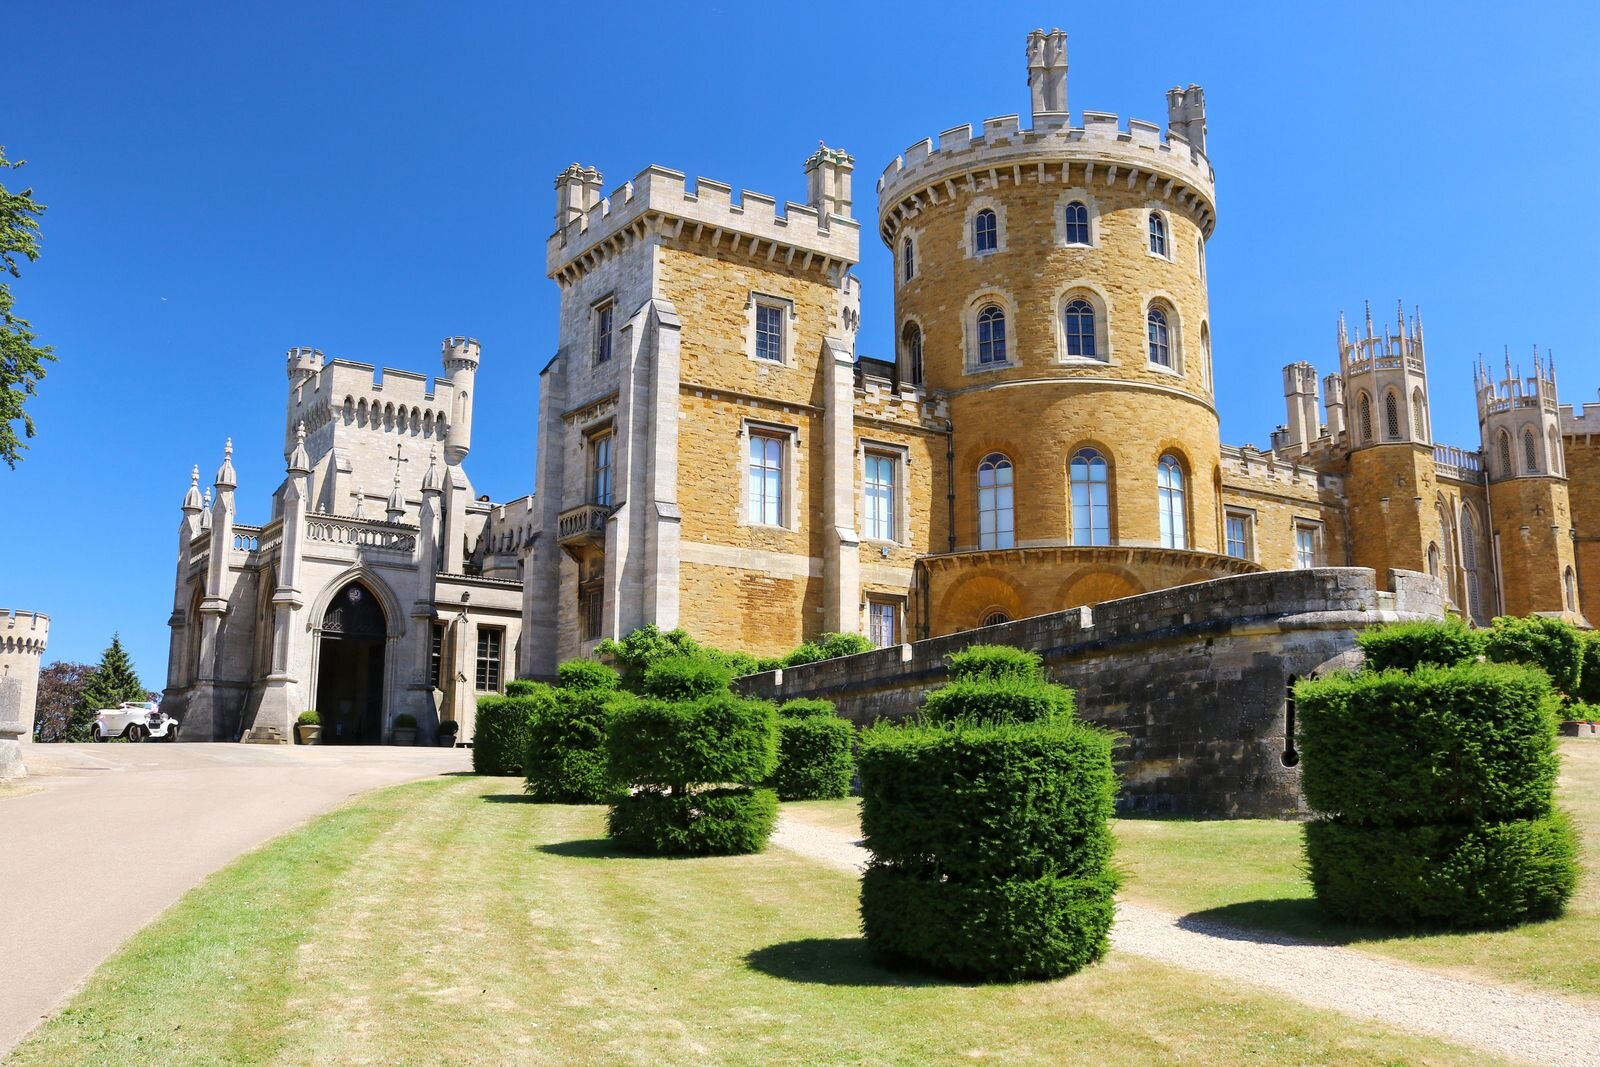 a sandy coloured castle with turrets and many windows. Landscaped gardens in front